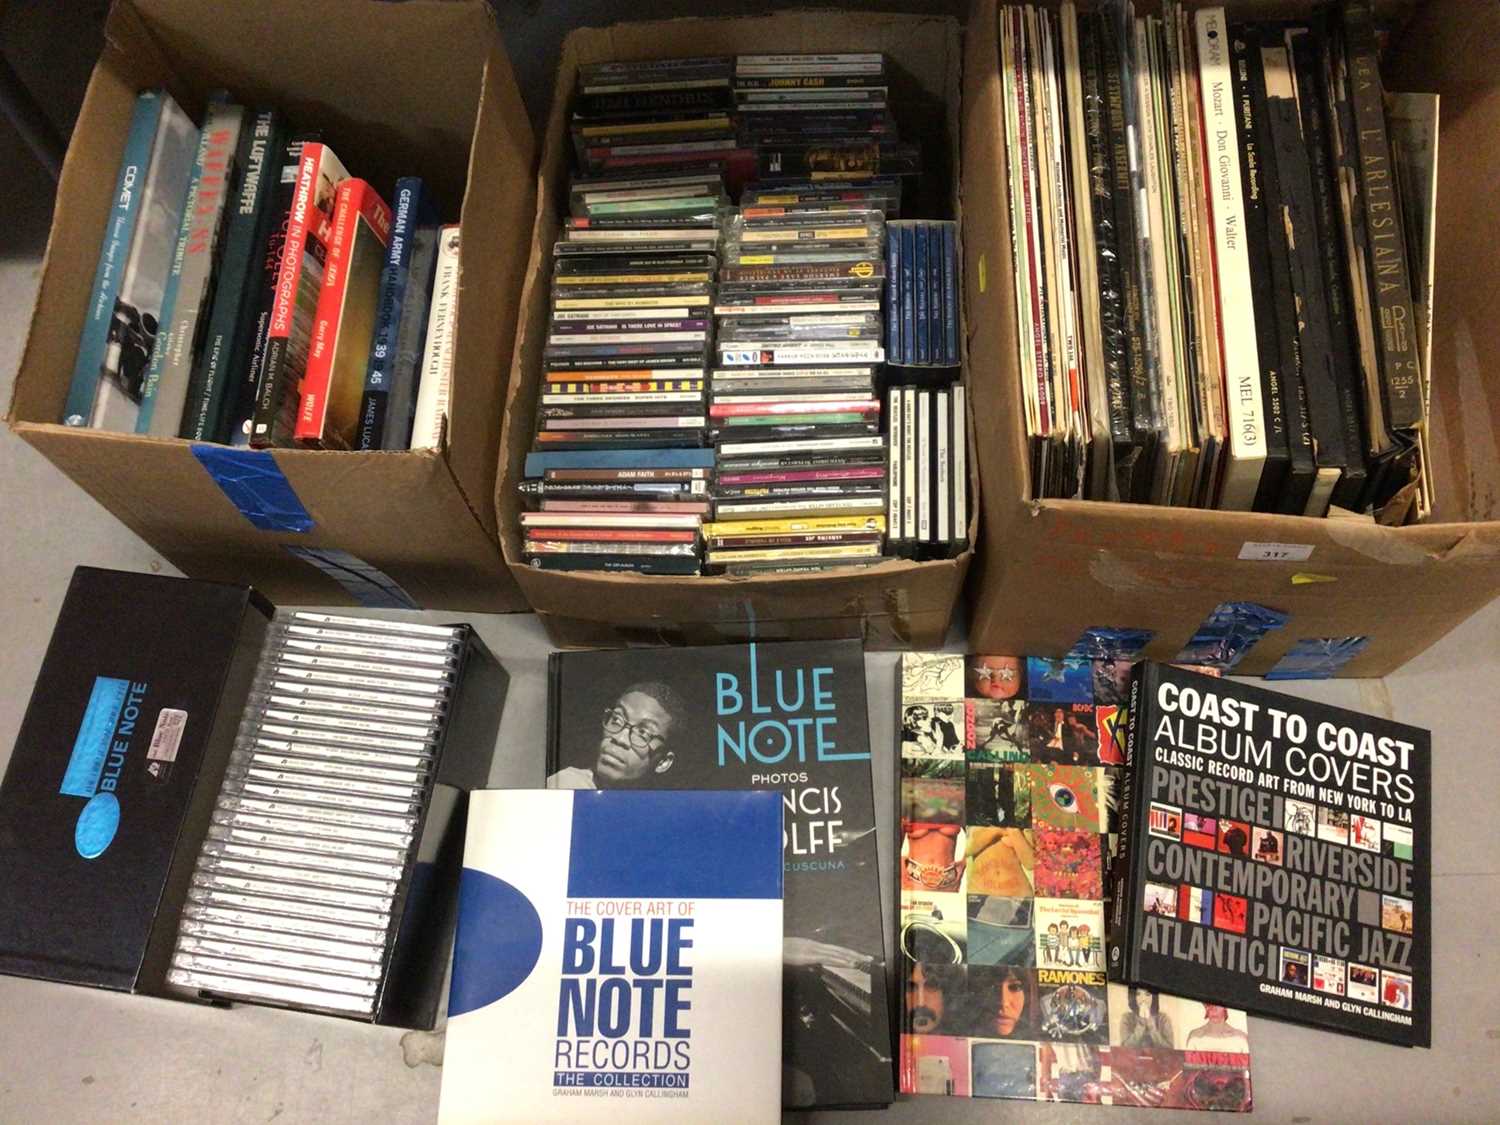 Lot 317 - Group of LP records, CDs including Jazz Blue Note boxed set, similar related books, The Art of the LP Classic Album Covers by Morgan and Wardle, plus some military and aircraft books